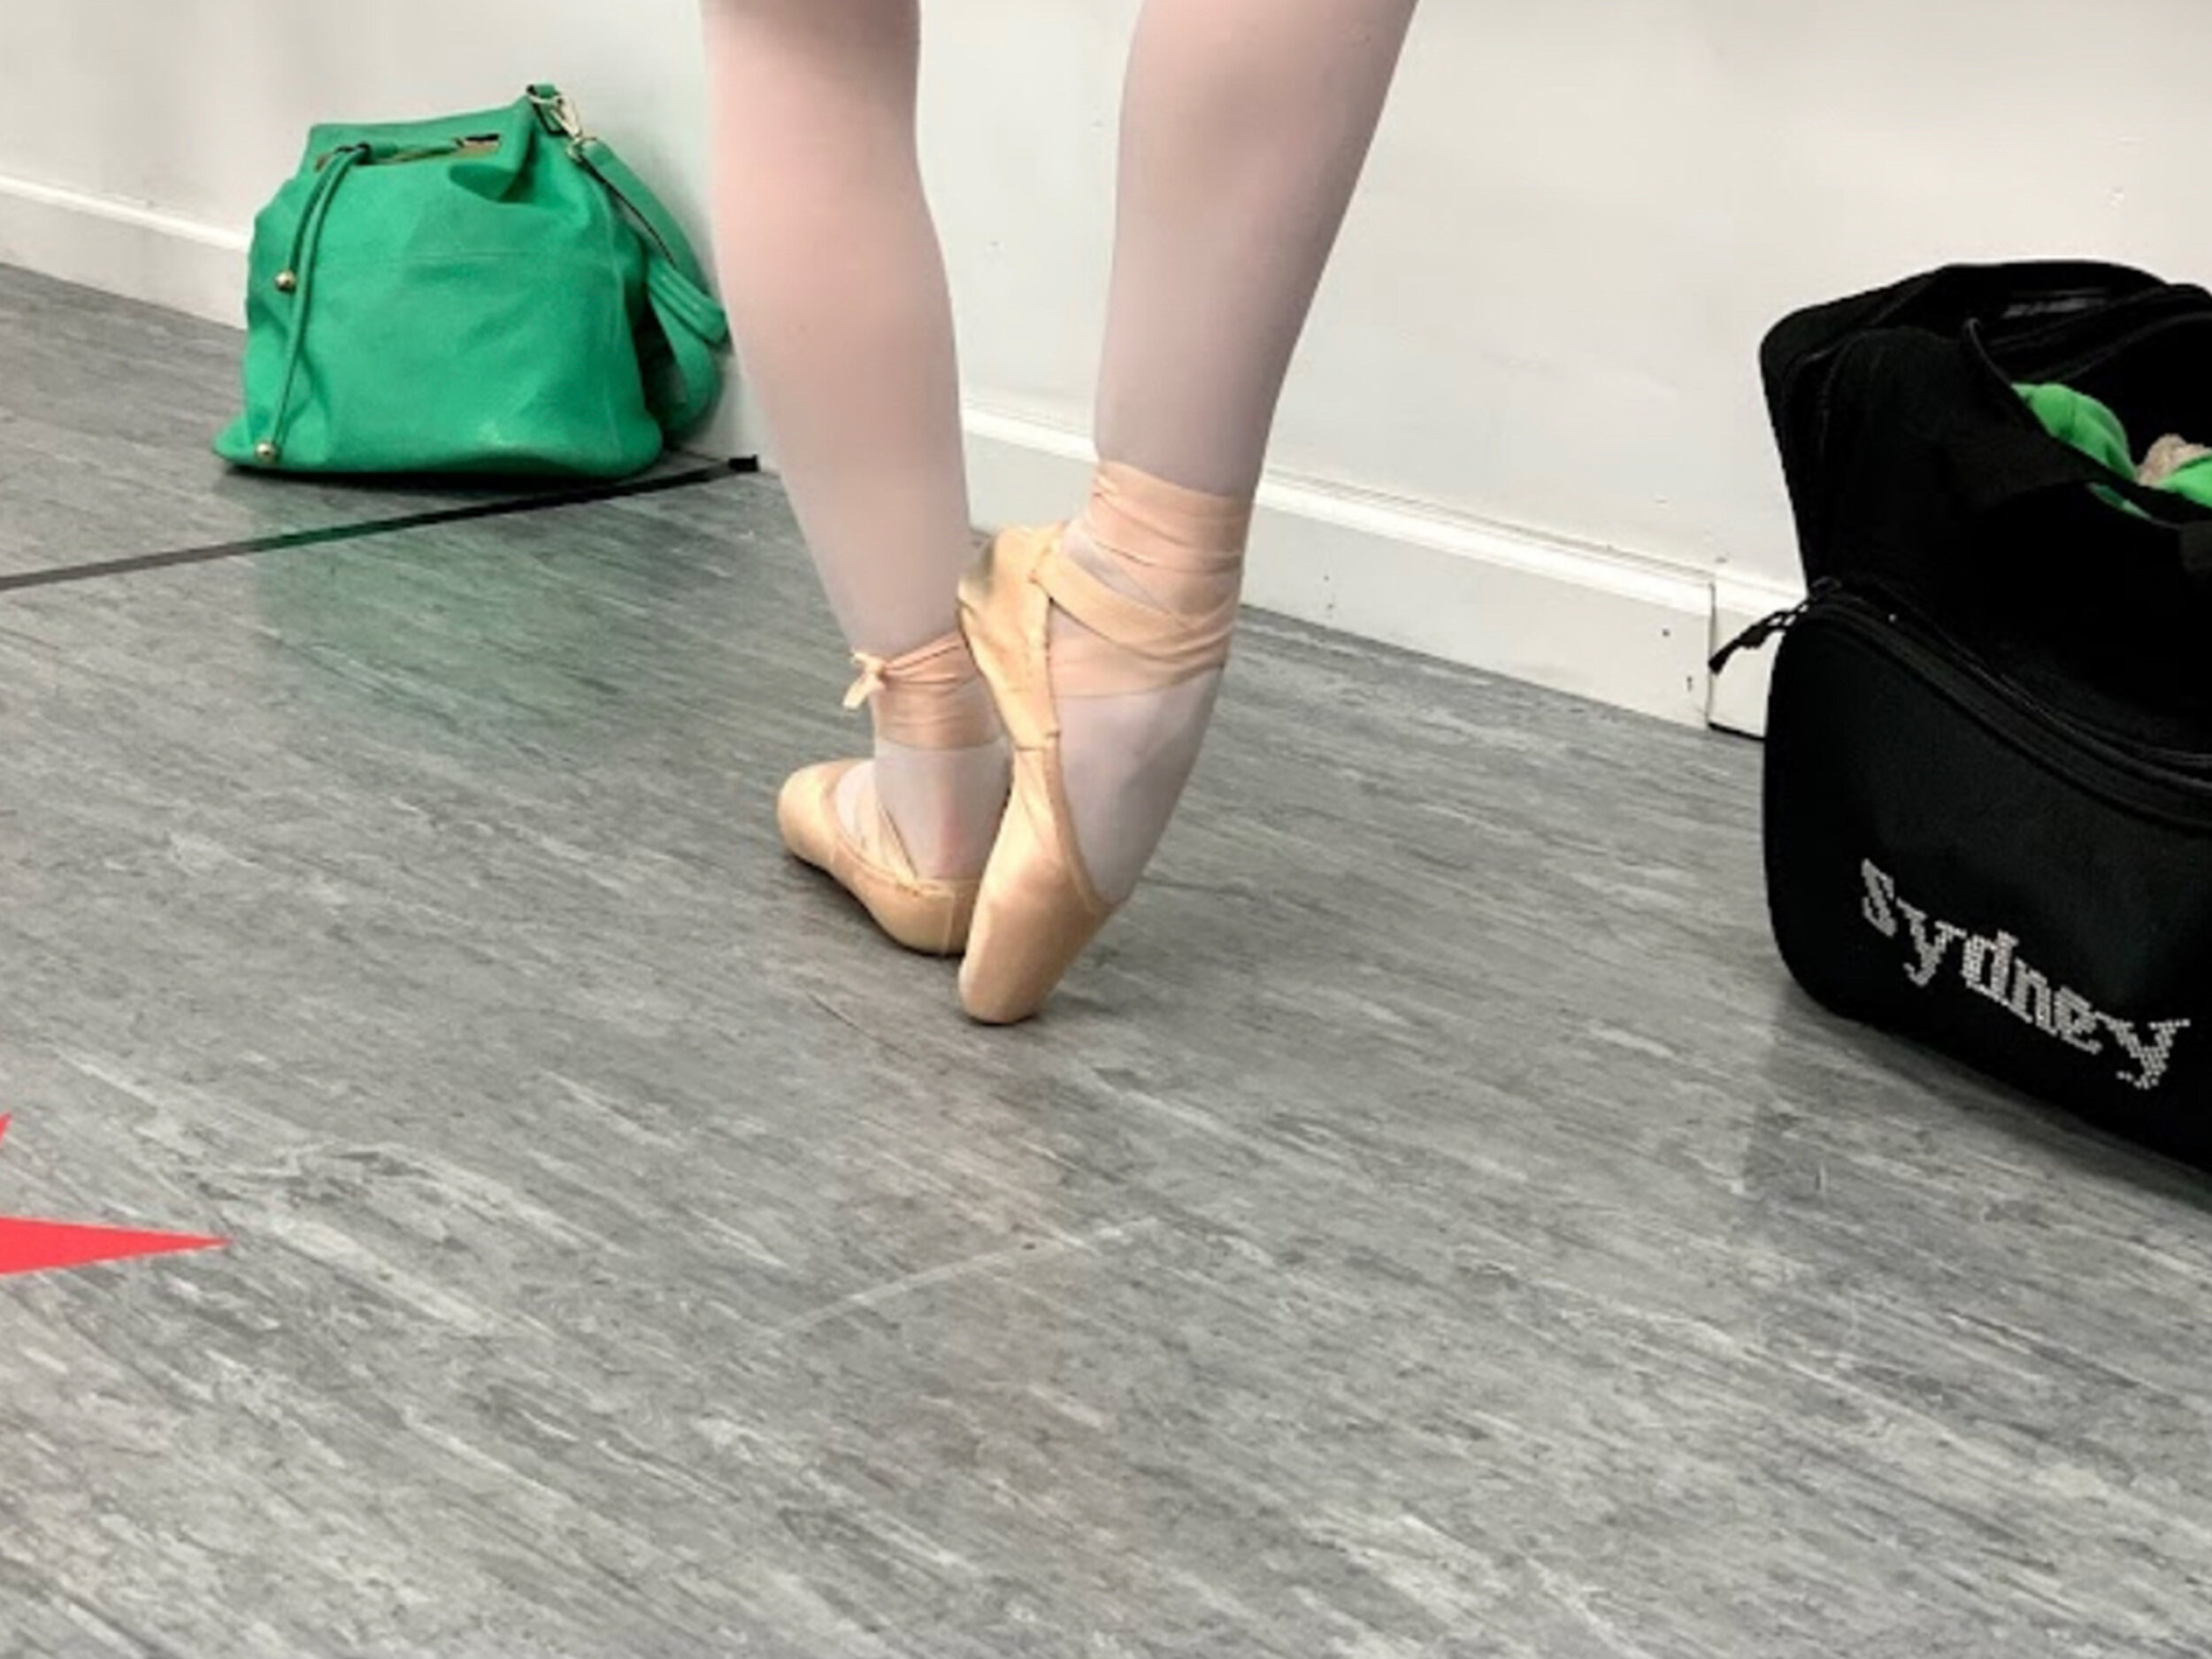 Heels Short Course | May, May, high heels | Master the posture, strength  and confidence to dance in heels at Eli Crawford's 4-week Introductory  Short Course starting on Monday 9 May at